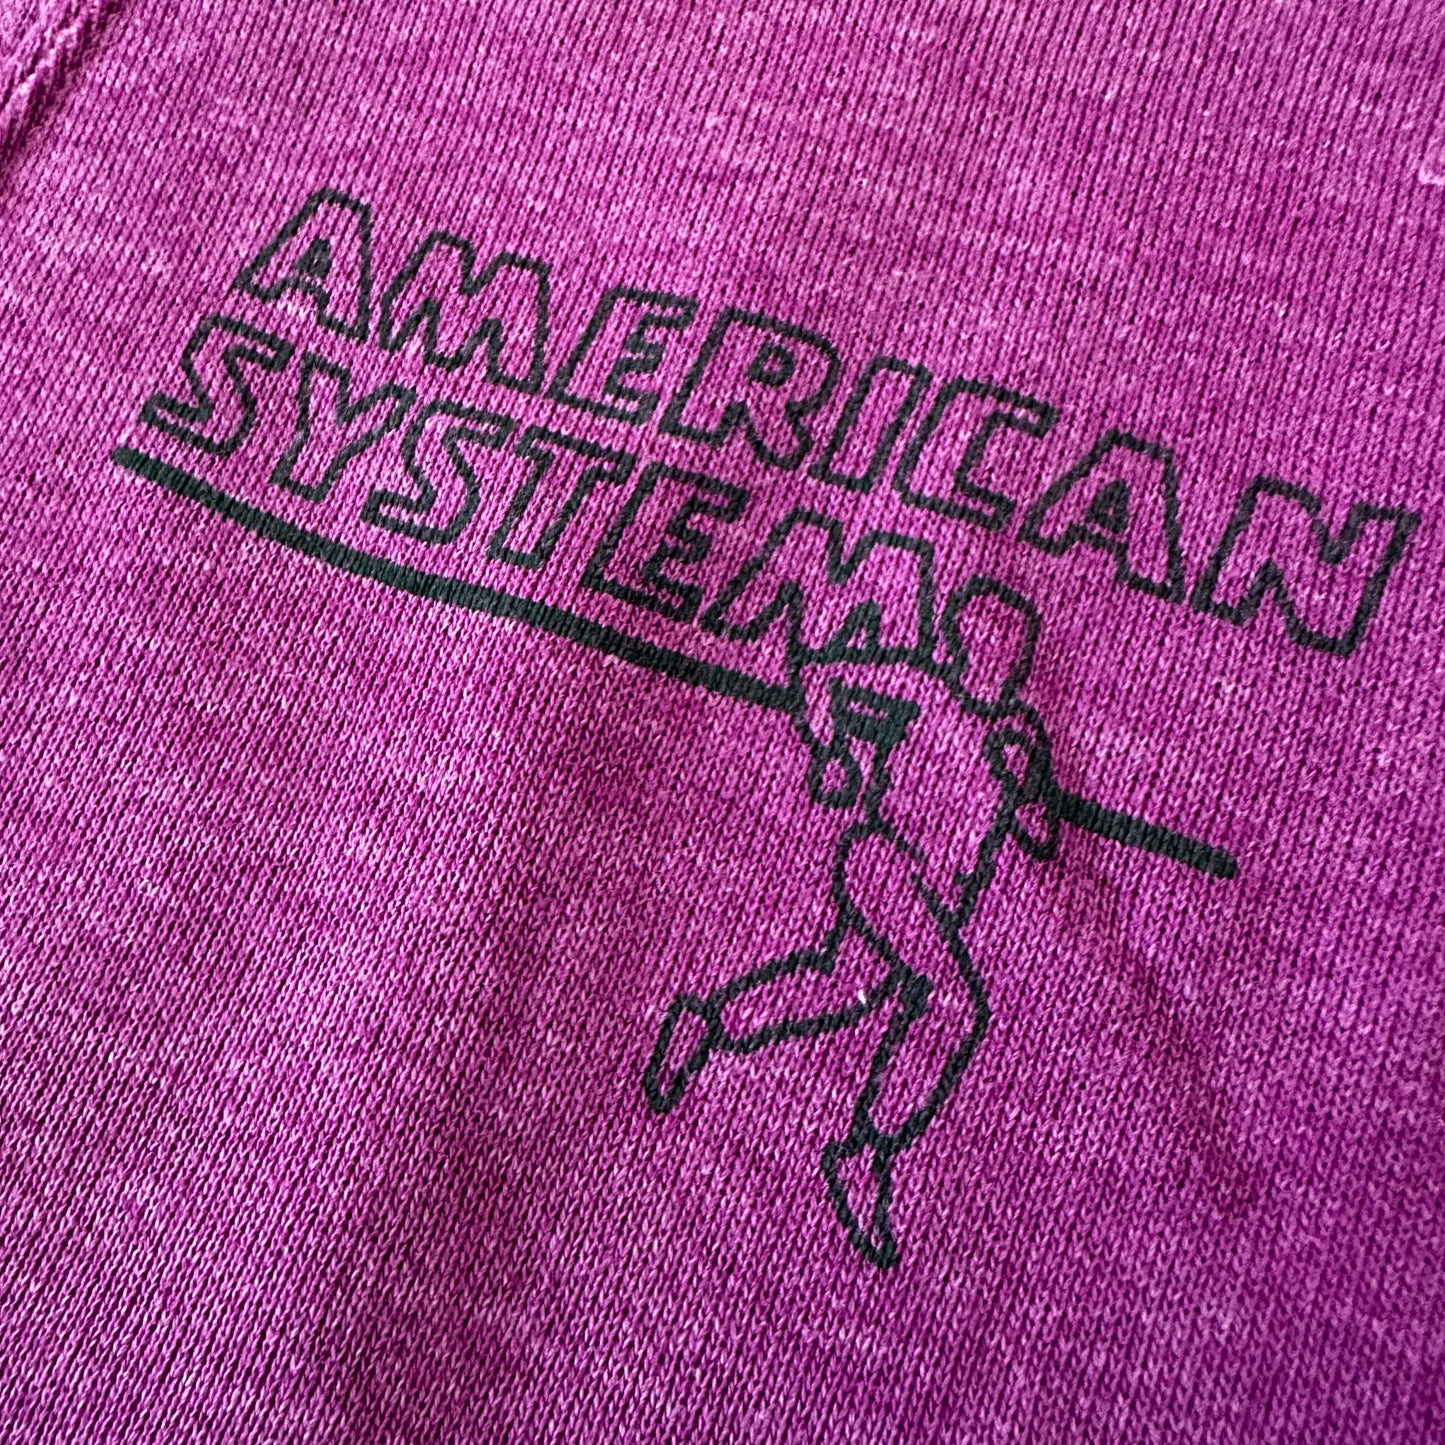 American System 80s Polo Sweatshirt - L - Made in Italy